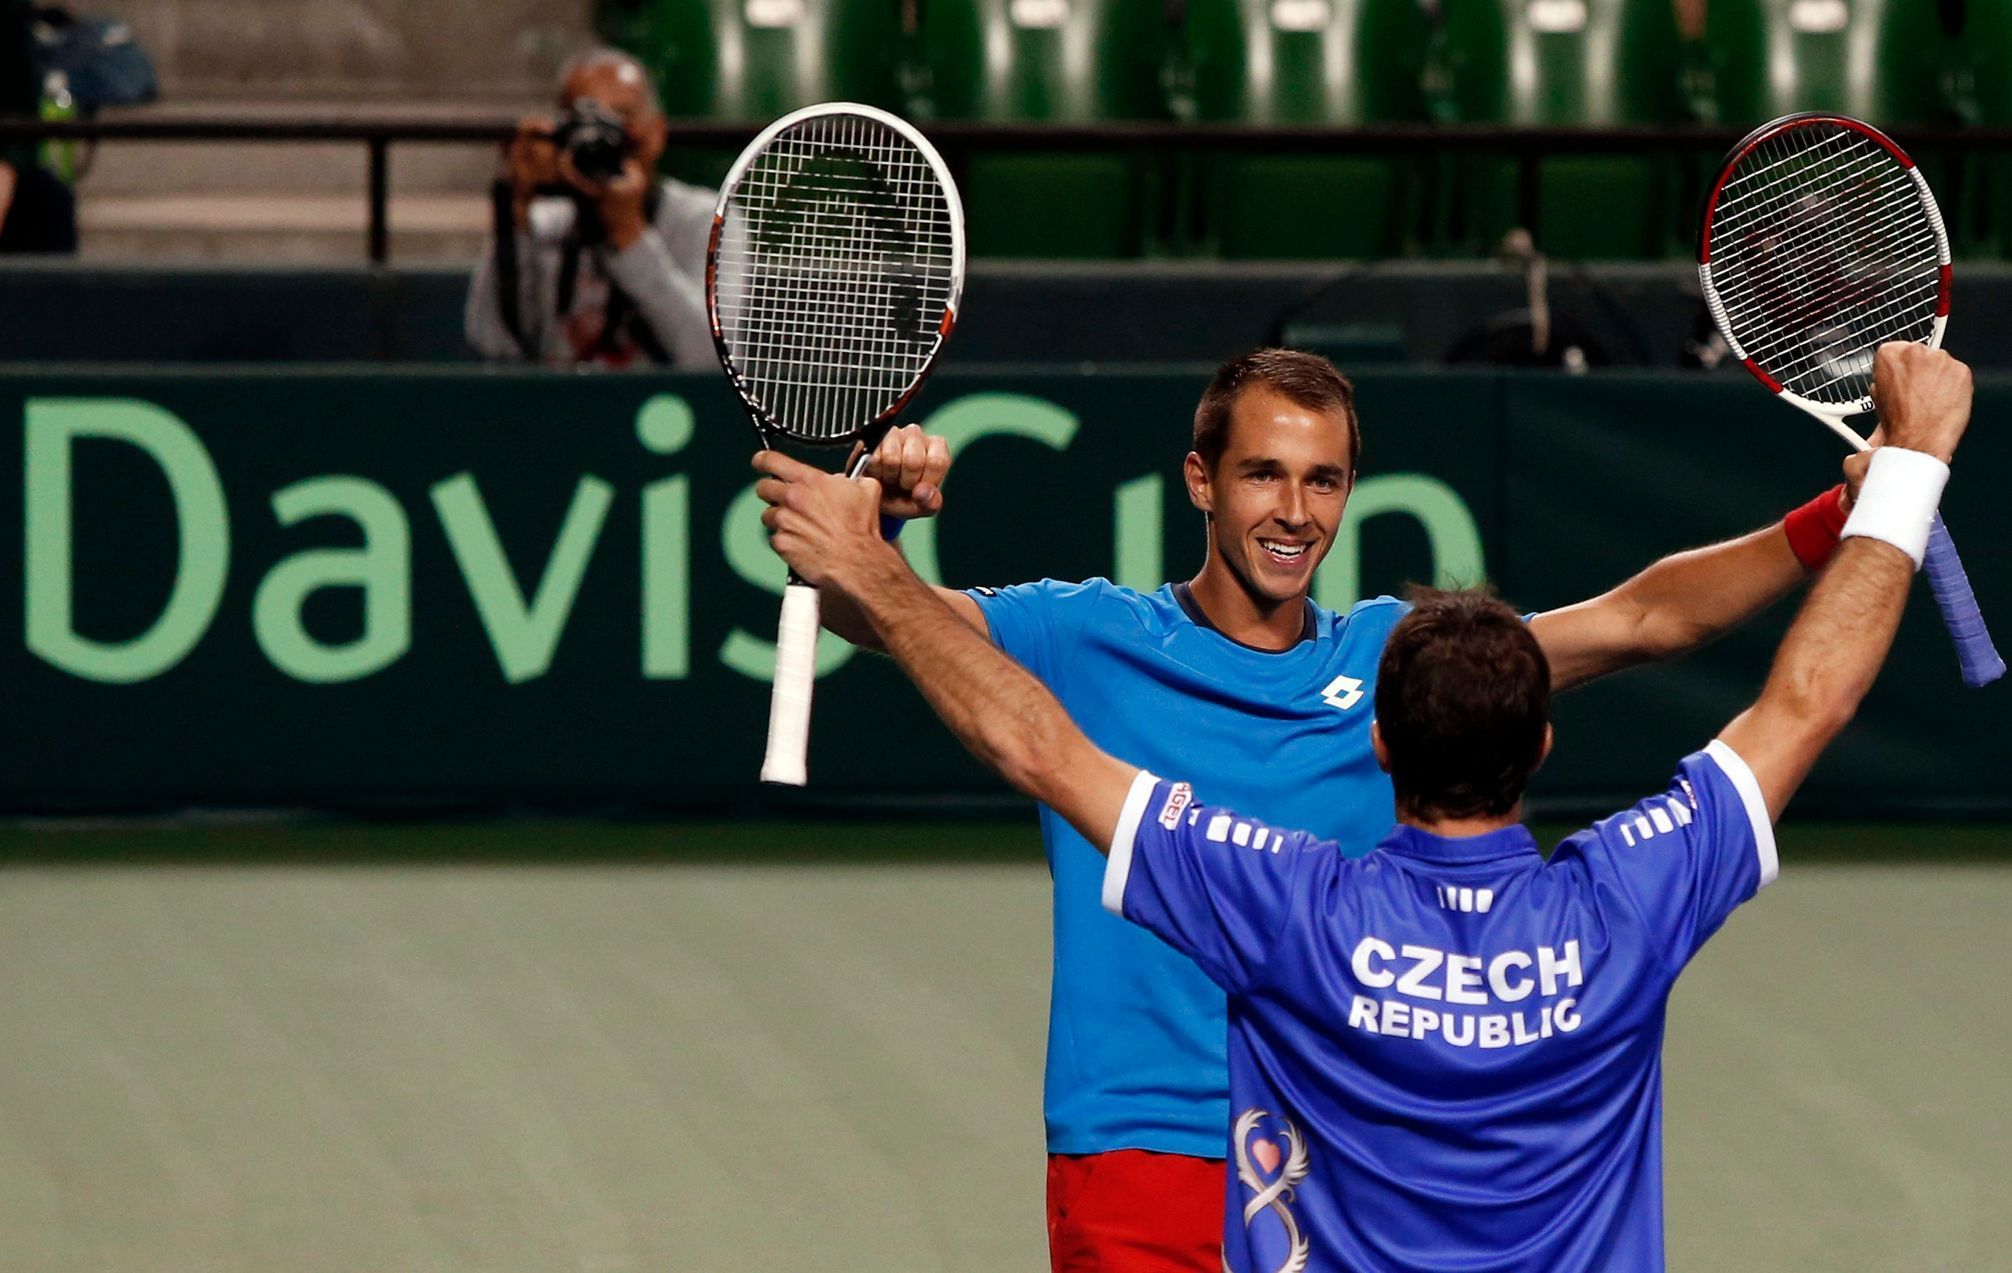 Rosol and Stepanek of Czech Republic celebrate after winning their Davis Cup men's doubles quarter-final tennis match against Japan's Ito and Uchiyama in Tokyo